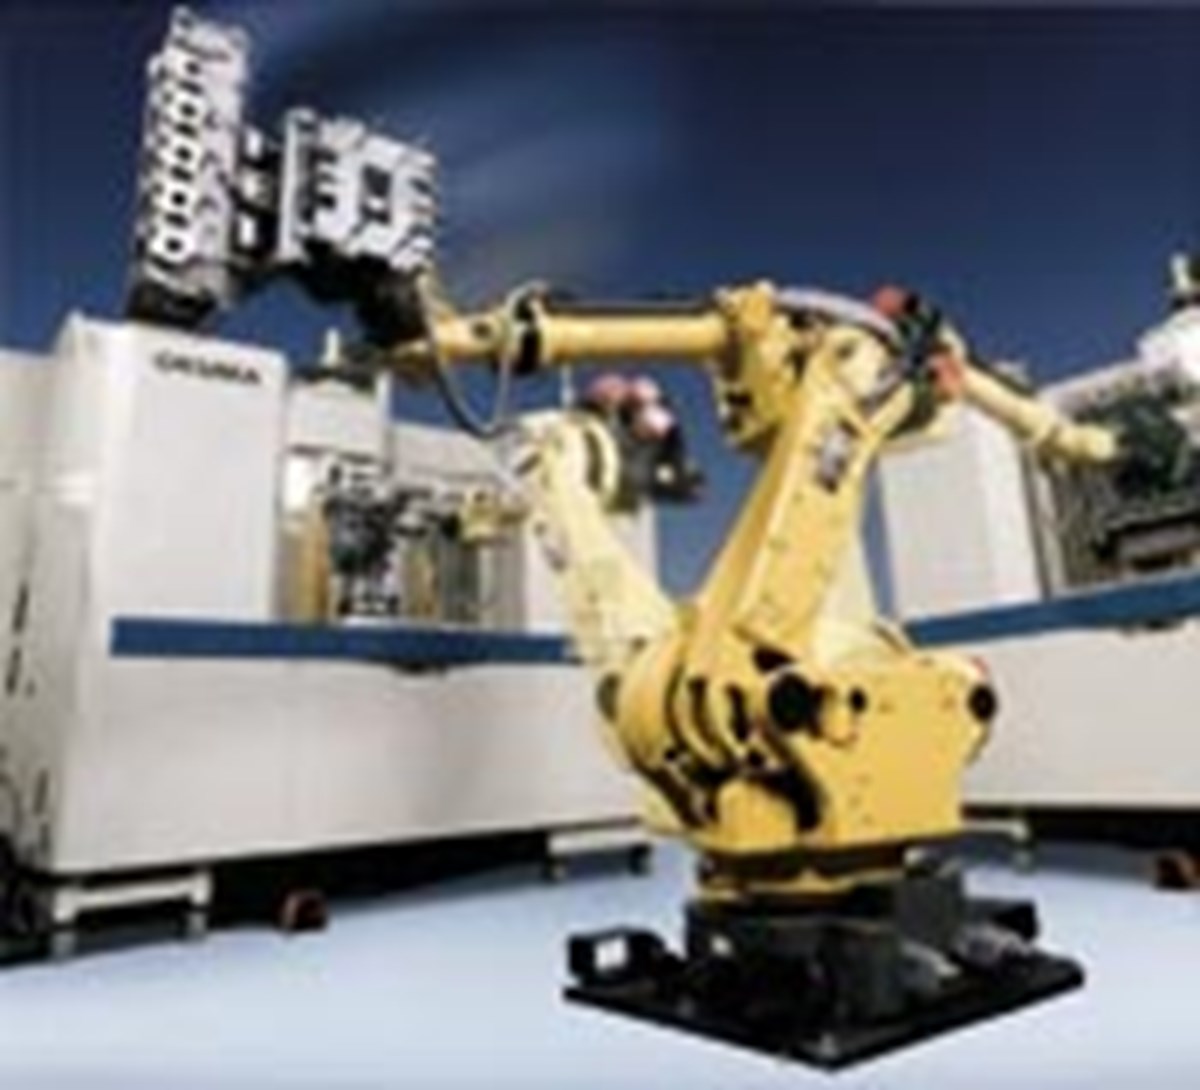 CNC Robotics And Automation: Knowing When To Say 'When ...